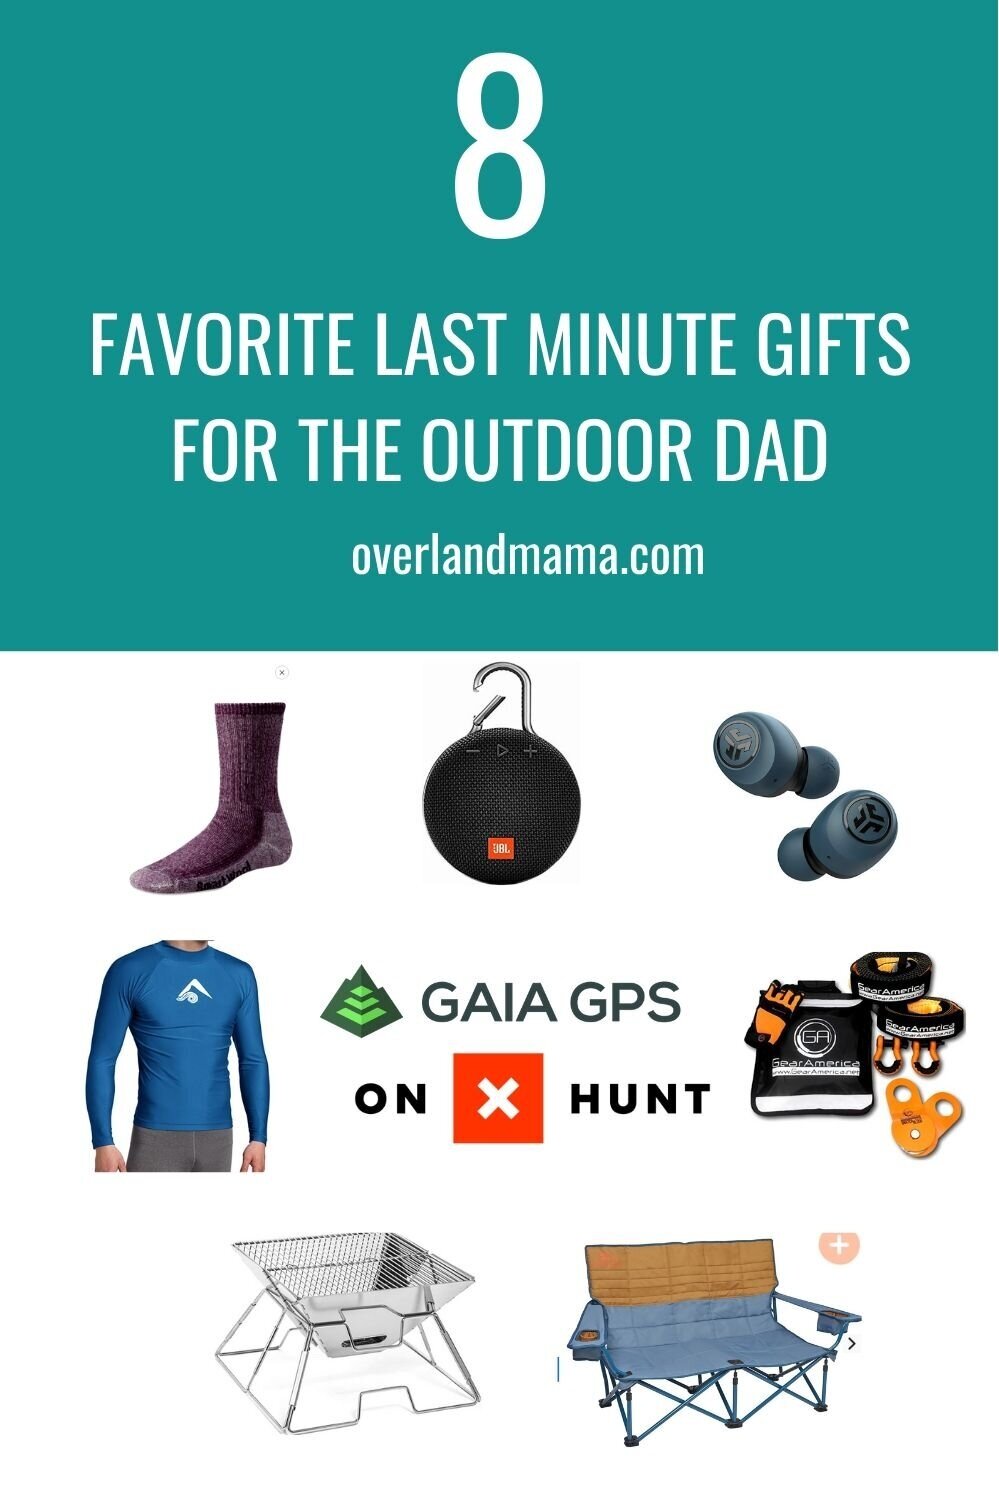 https://images.squarespace-cdn.com/content/v1/5b868c95f79392baccb721ab/1592327431071-8AEL04GRWTUXDUX2YGG5/fathers-day-gift-outdoor